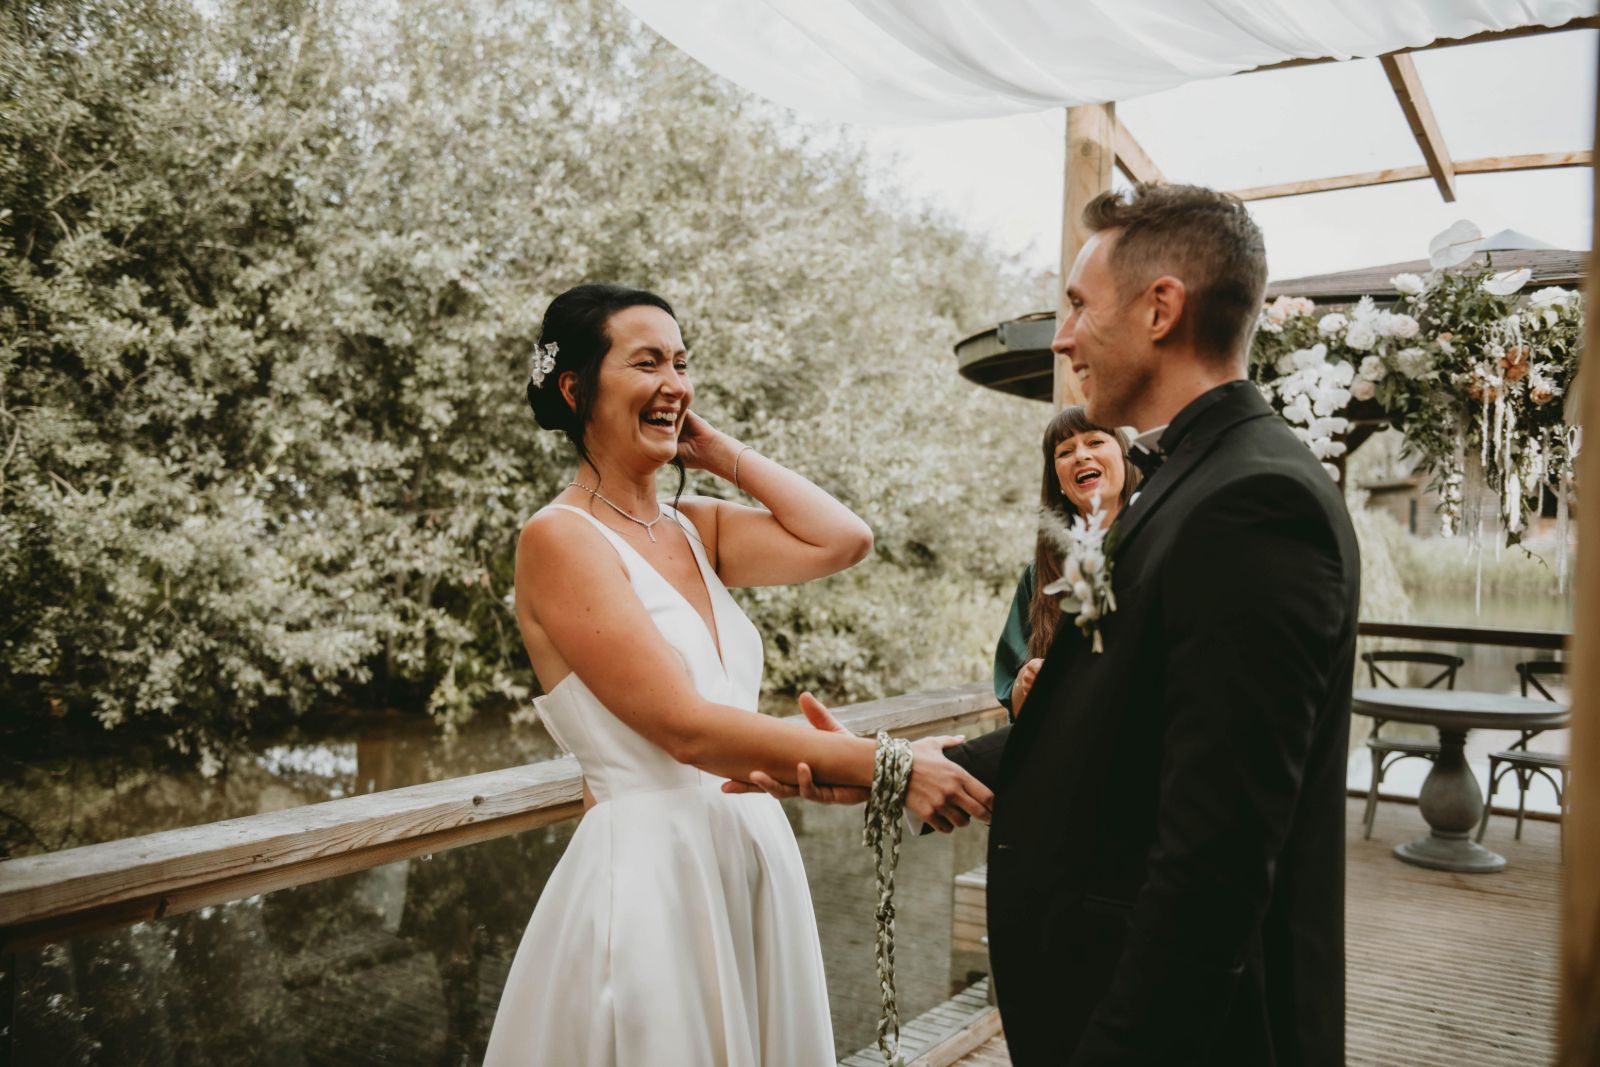 Celebrant-led Handfasting ceremony with laughing bride and groom outdoors by a lake